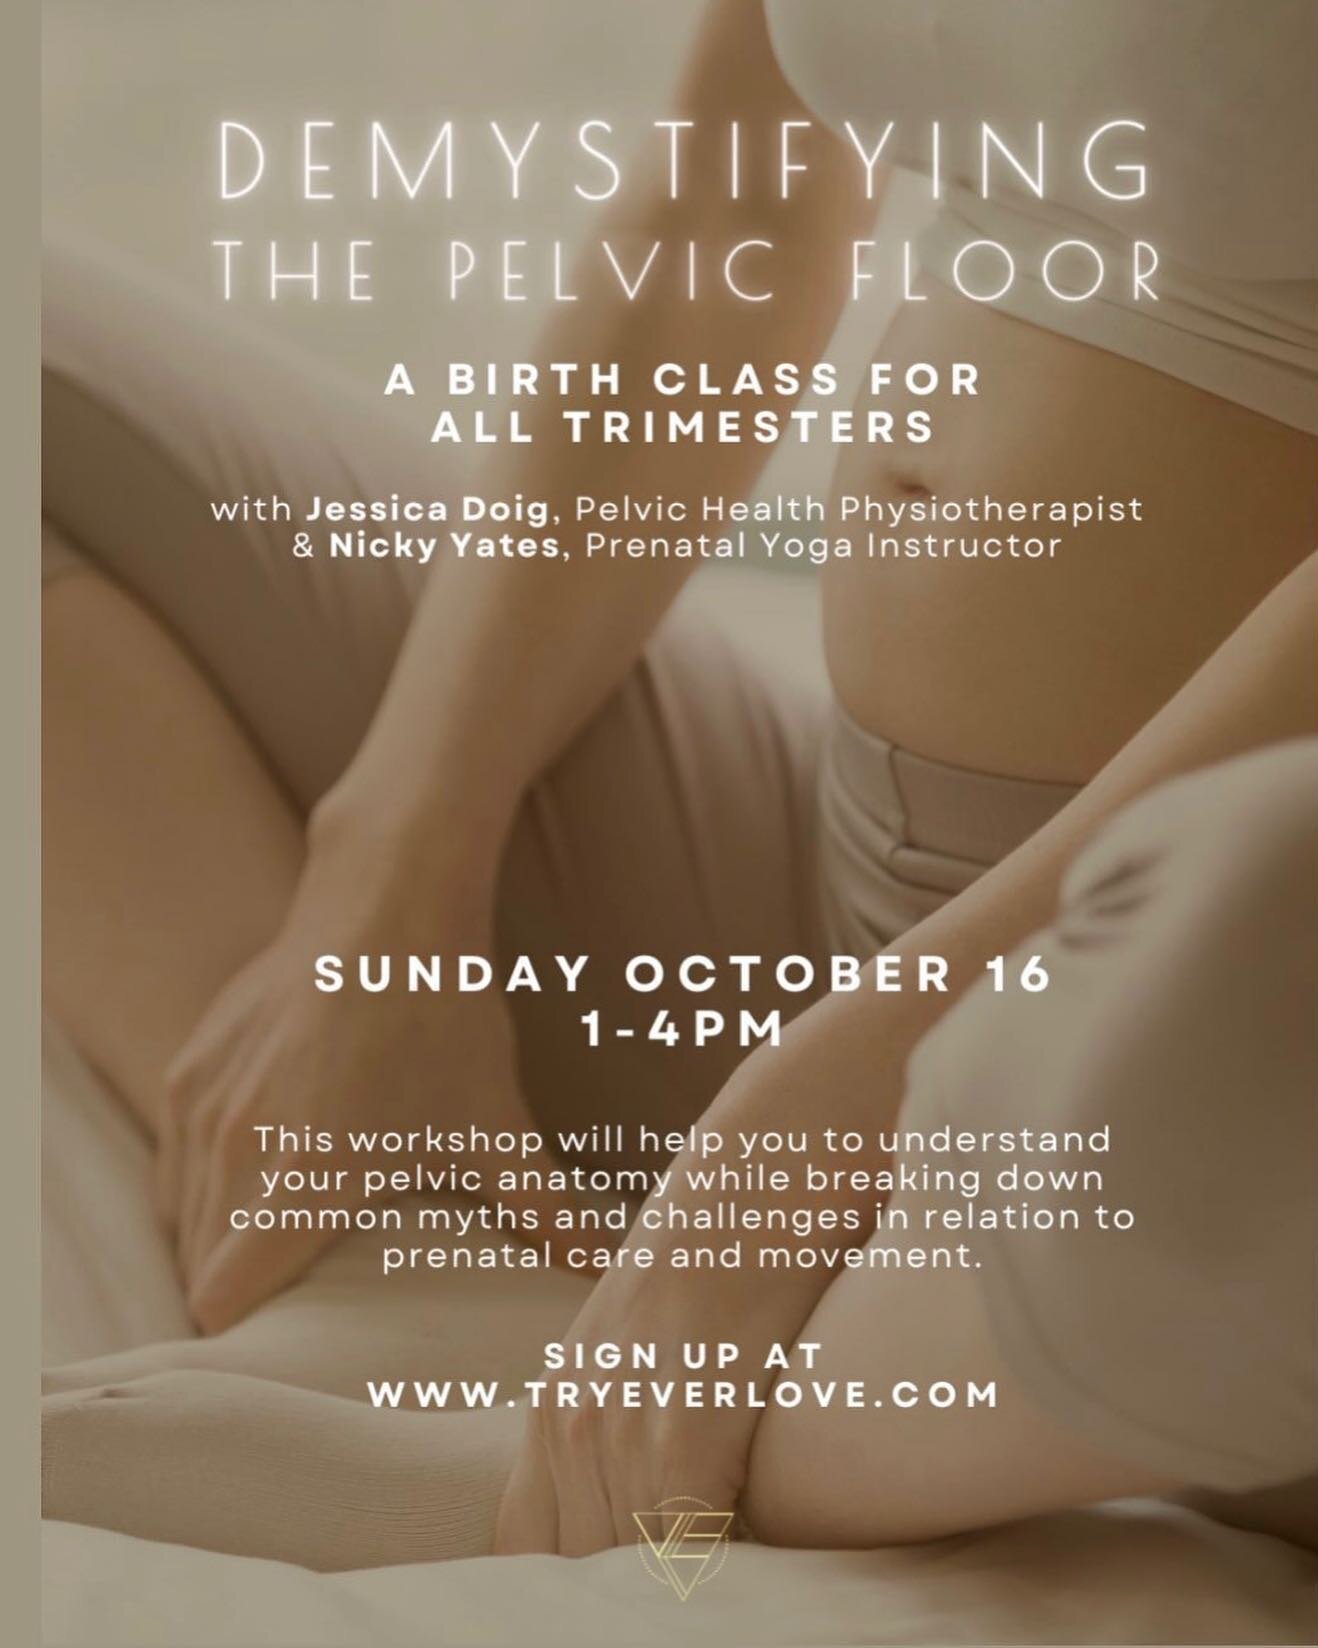 I am so excited to be hosting this IN-PERSON birth prep class with @everlovecollingwood and the amazing @neekyates. 

We will cover everything from birth positions to pushing techniques, core exercises for pregnancy and postpartum and how to optimize